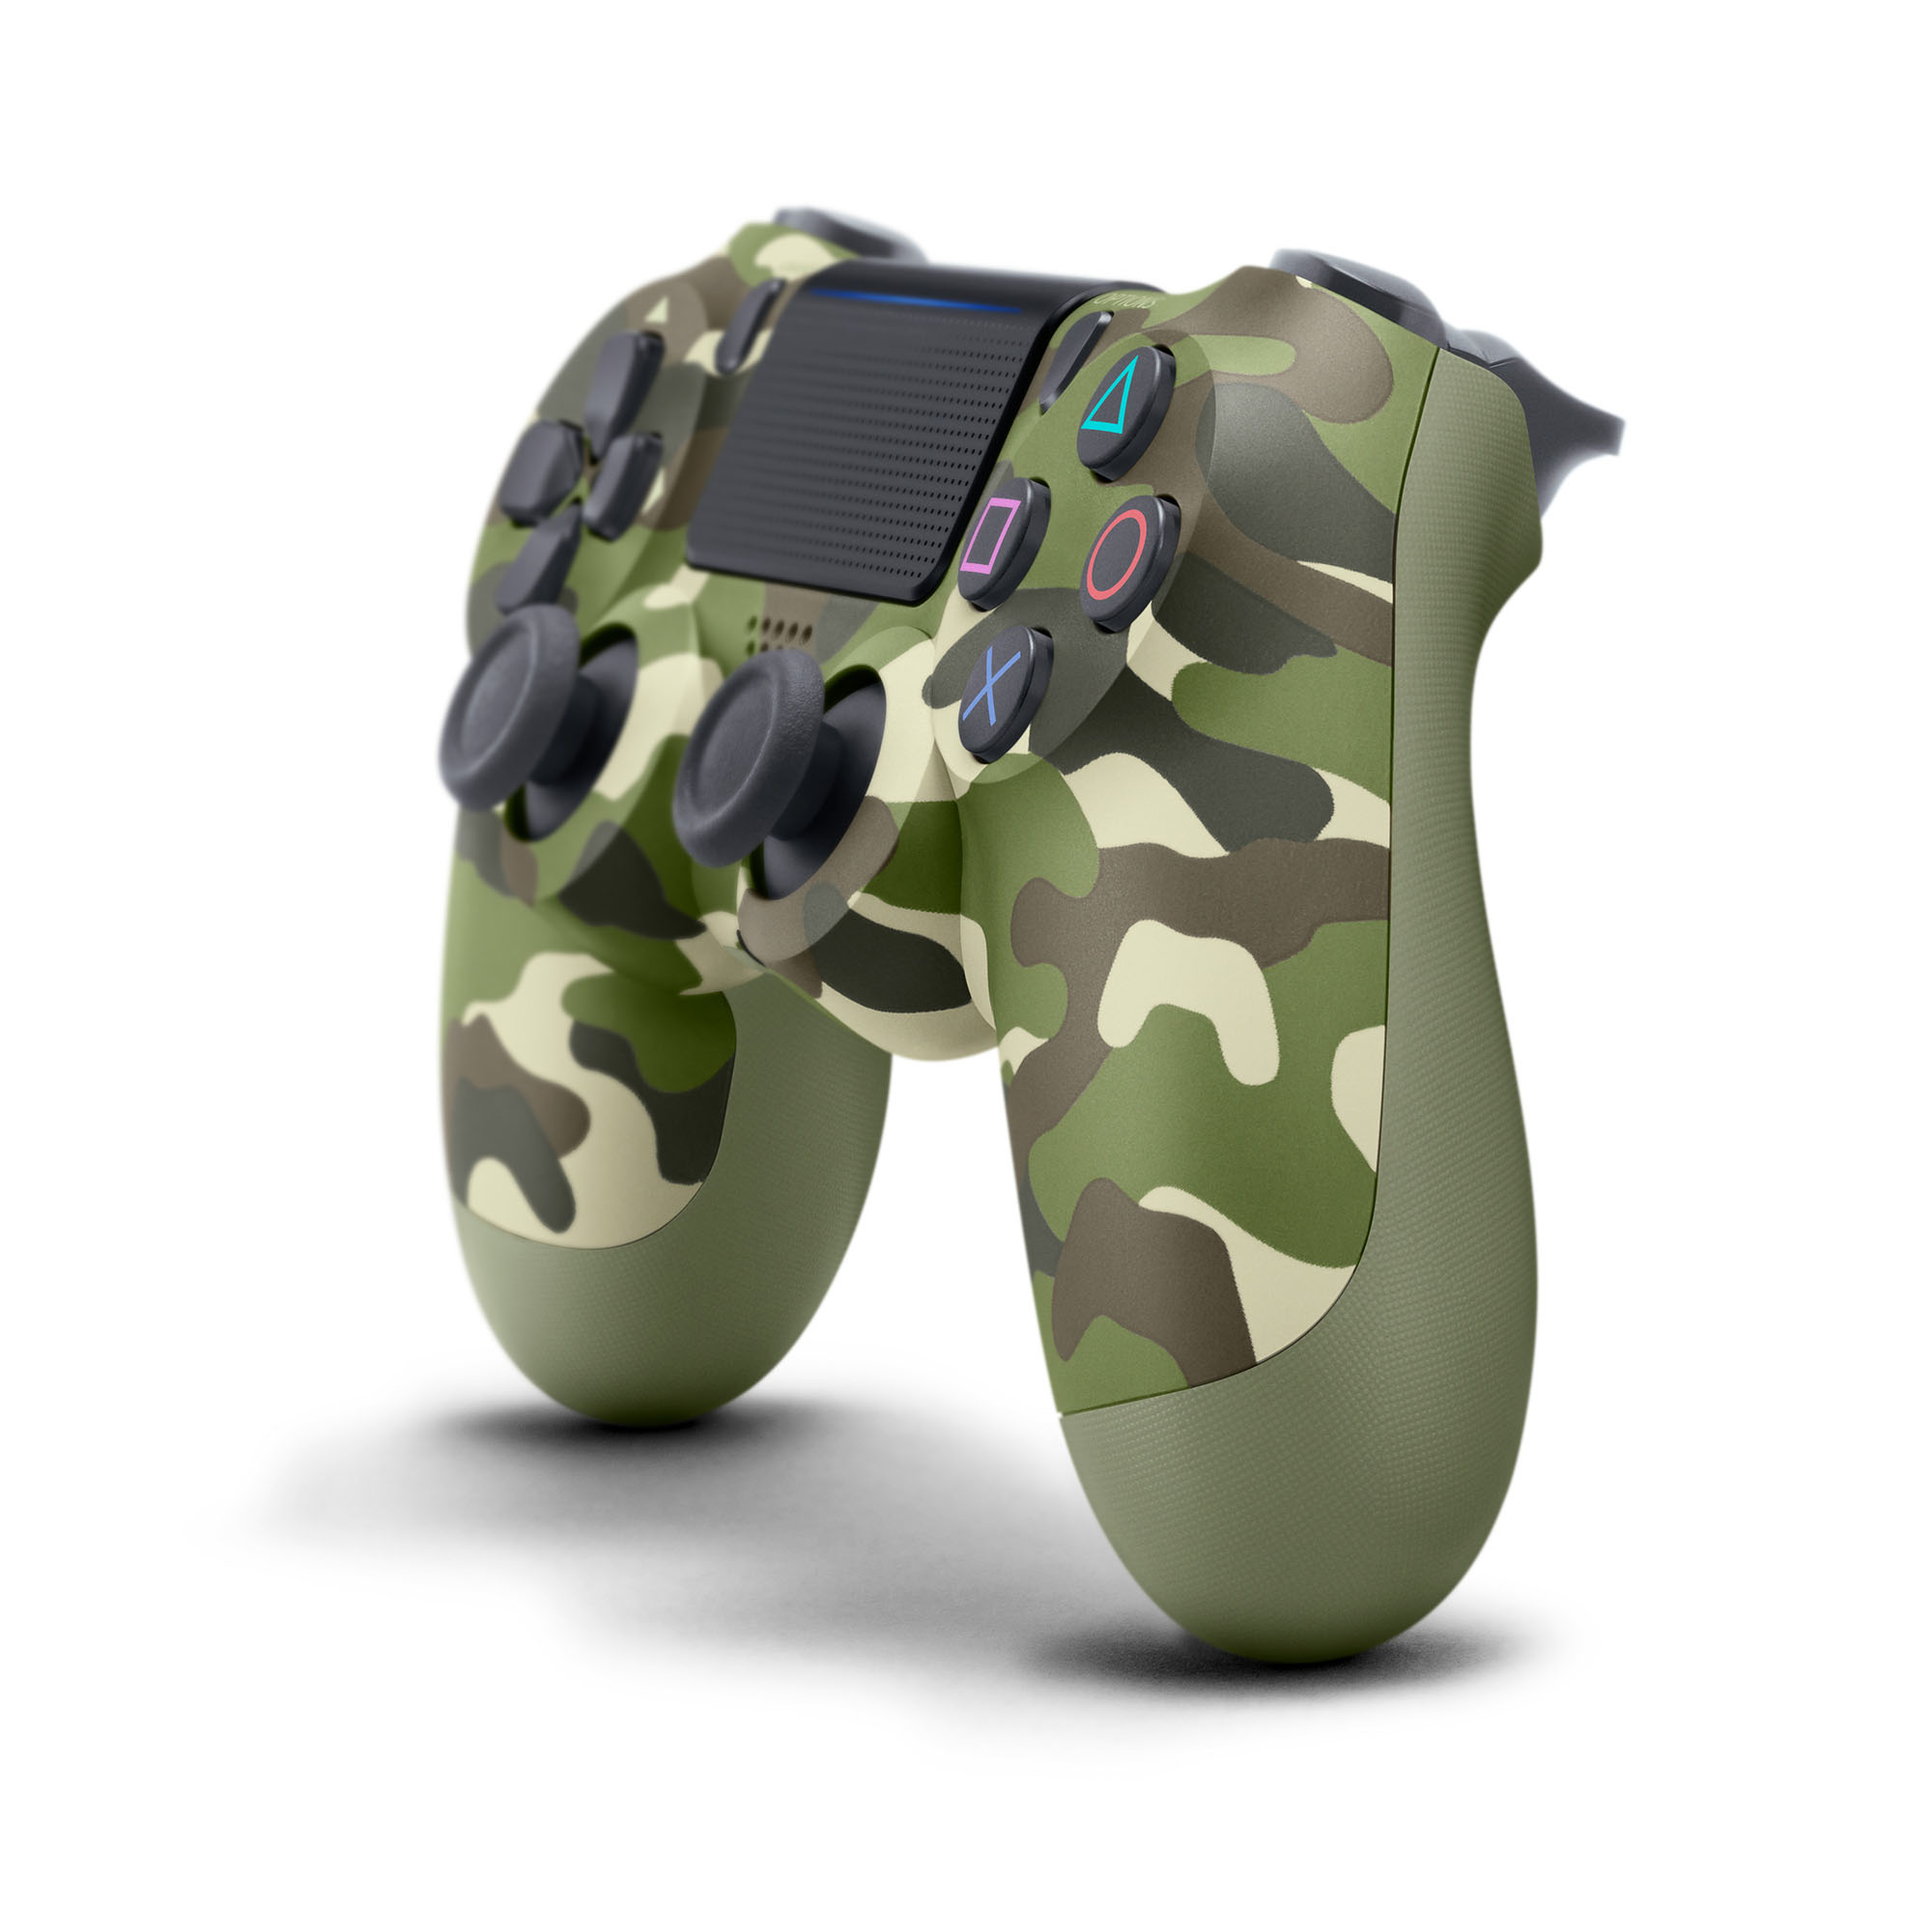 PS4, Dualshock 4 Green Camouflage